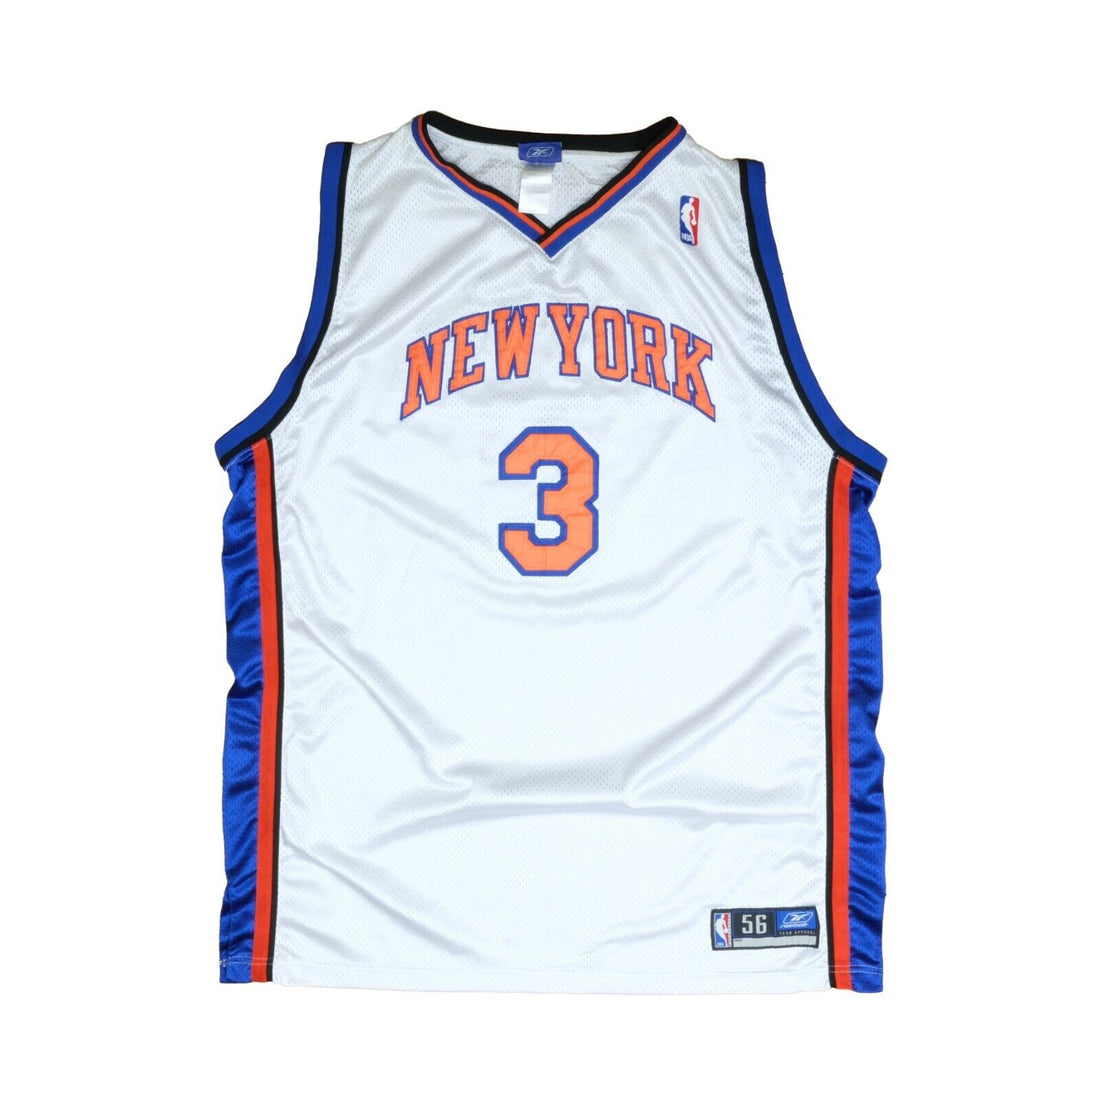 VINTAGE AUTHENTIC WHITE JERSEY STEPHON MARBURY NEW JERSEY NETS SZ